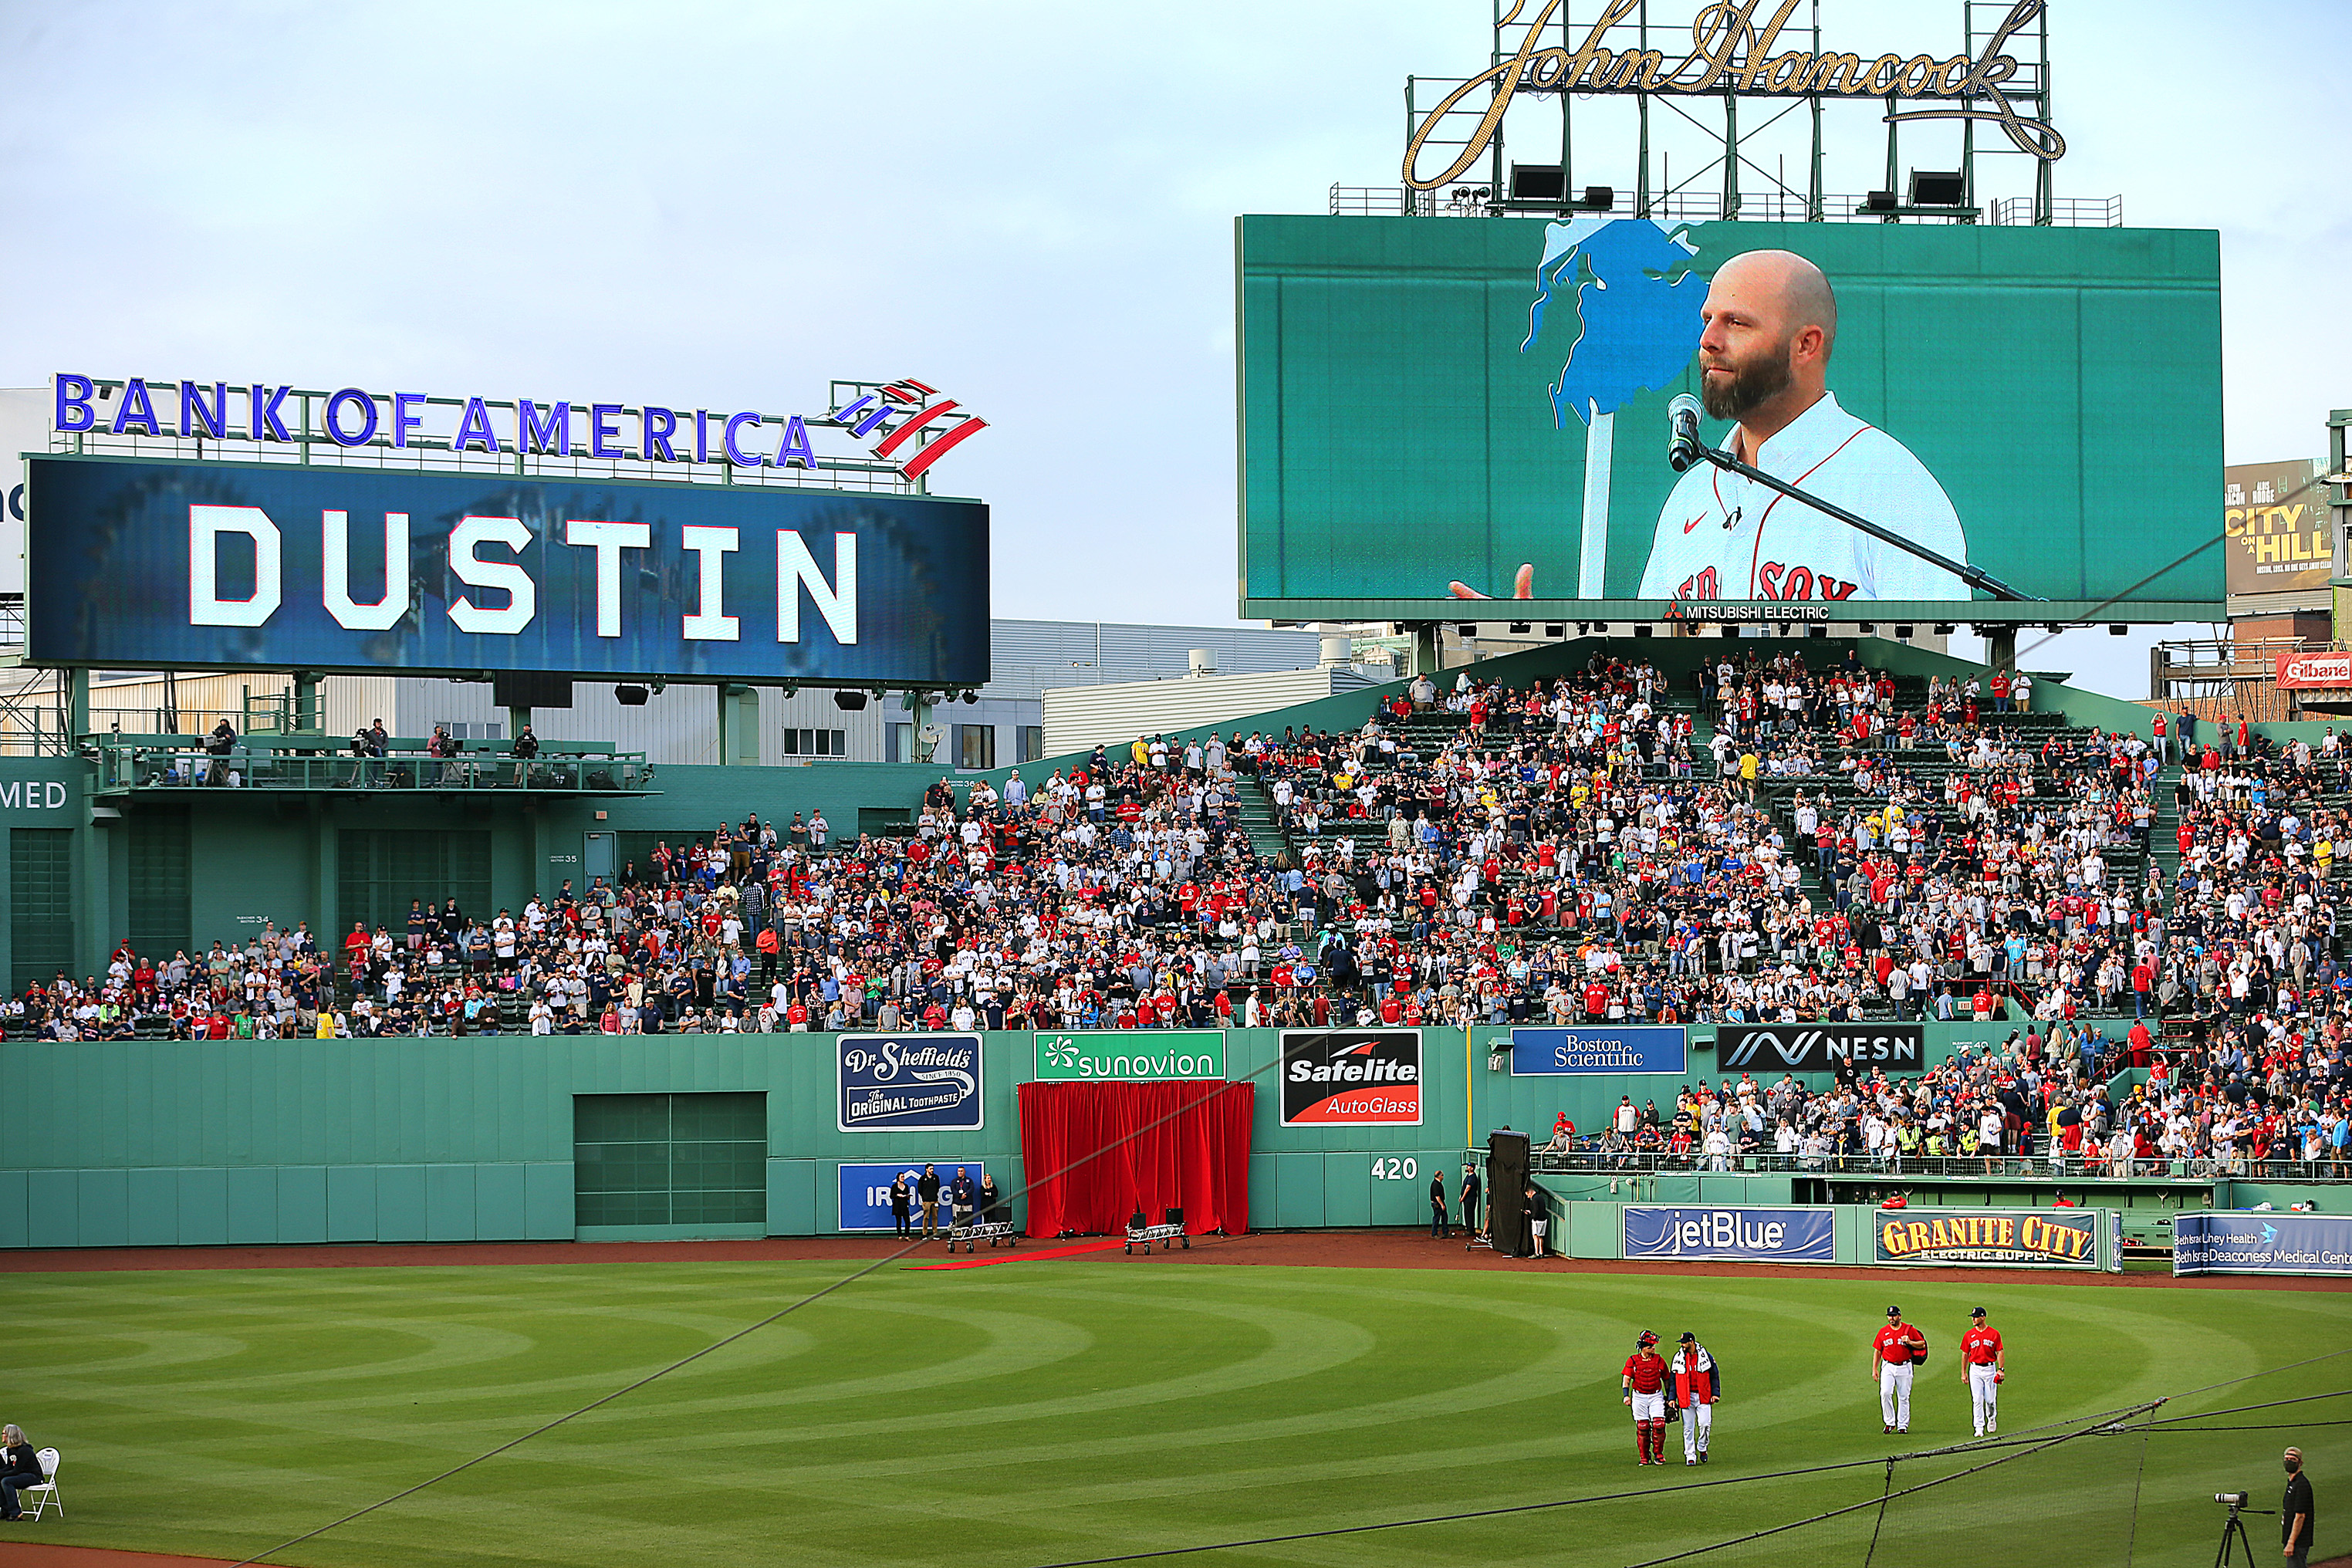 Dustin Pedroia 'Completely Shocked' by Ric Flair Fenway Park